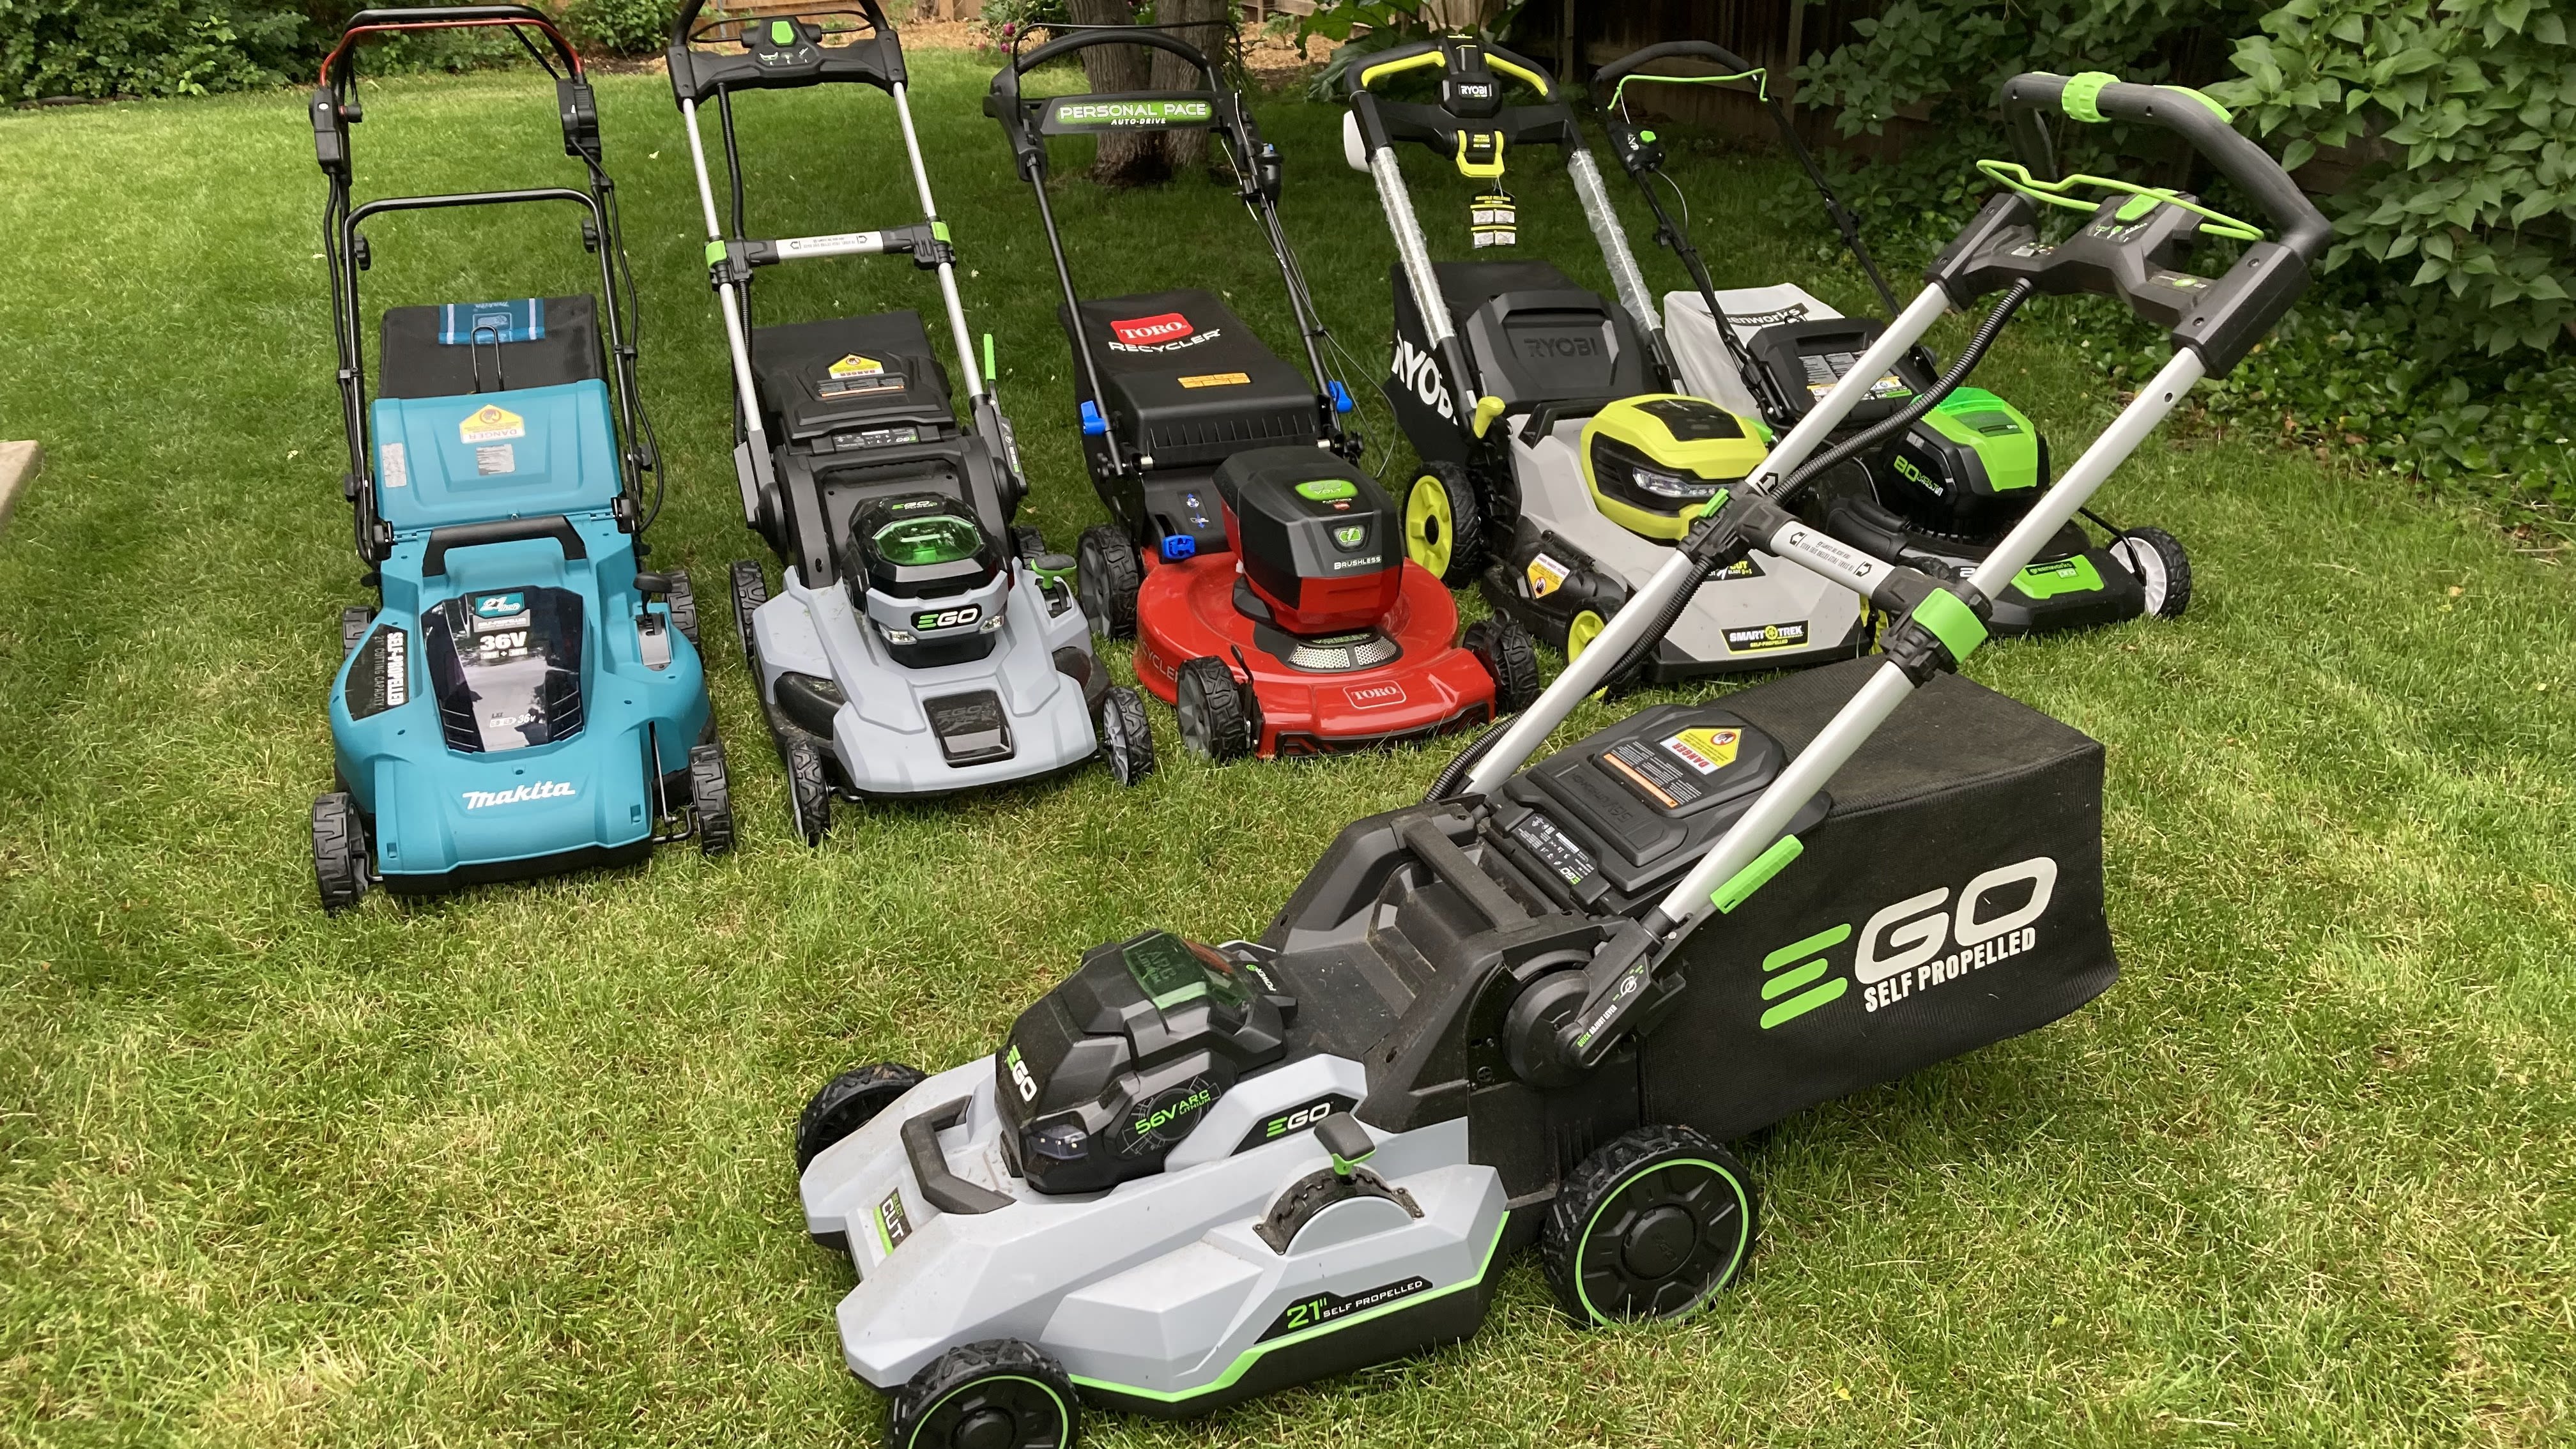 The Future Is Electric for Lawn Tools. Here's a Stock to Play It